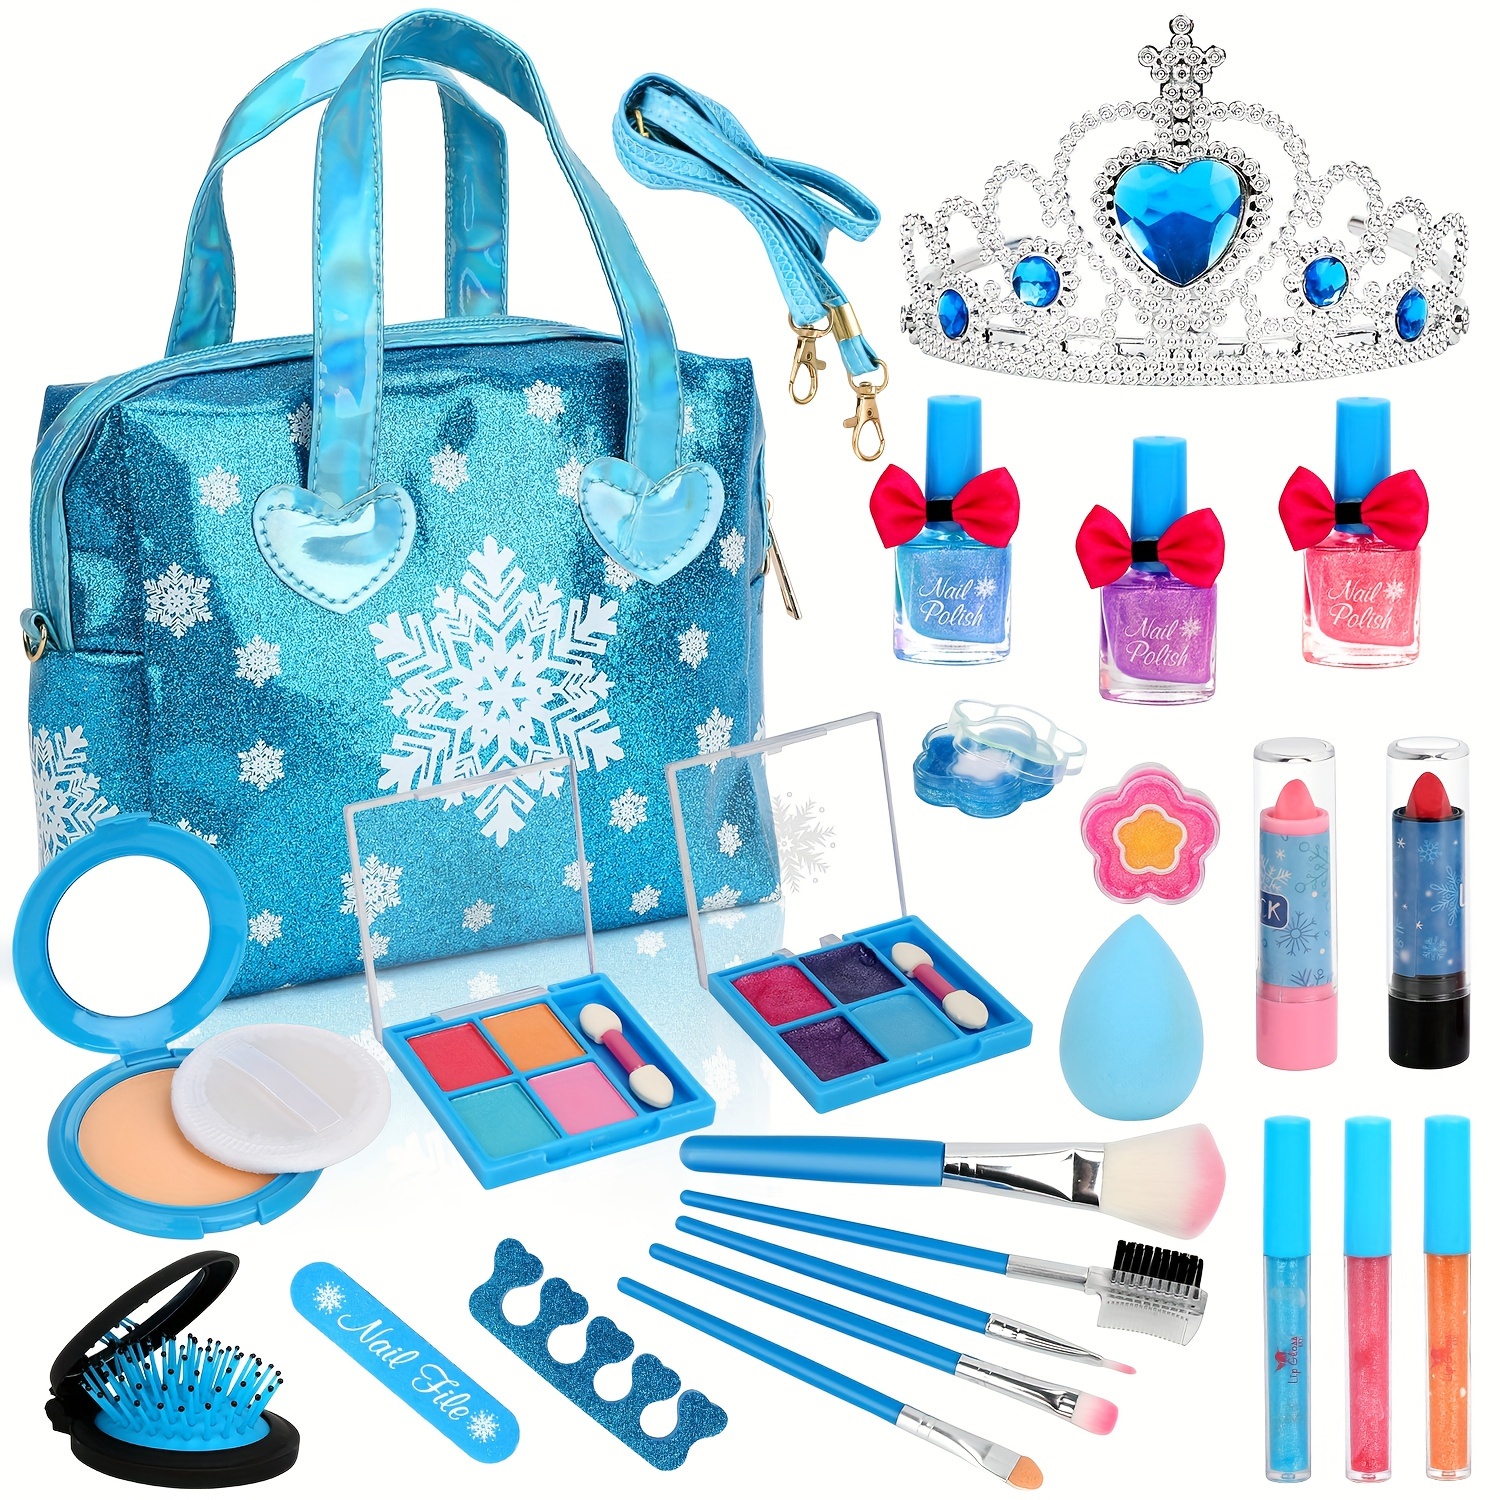 25pcs Kids Makeup Kit for Girl, Play Makeup for Little Girl ,Washable Makeup Toy Set,Real Cosmetic Beauty Set for Kids., Size: 25 Pcs, Blue